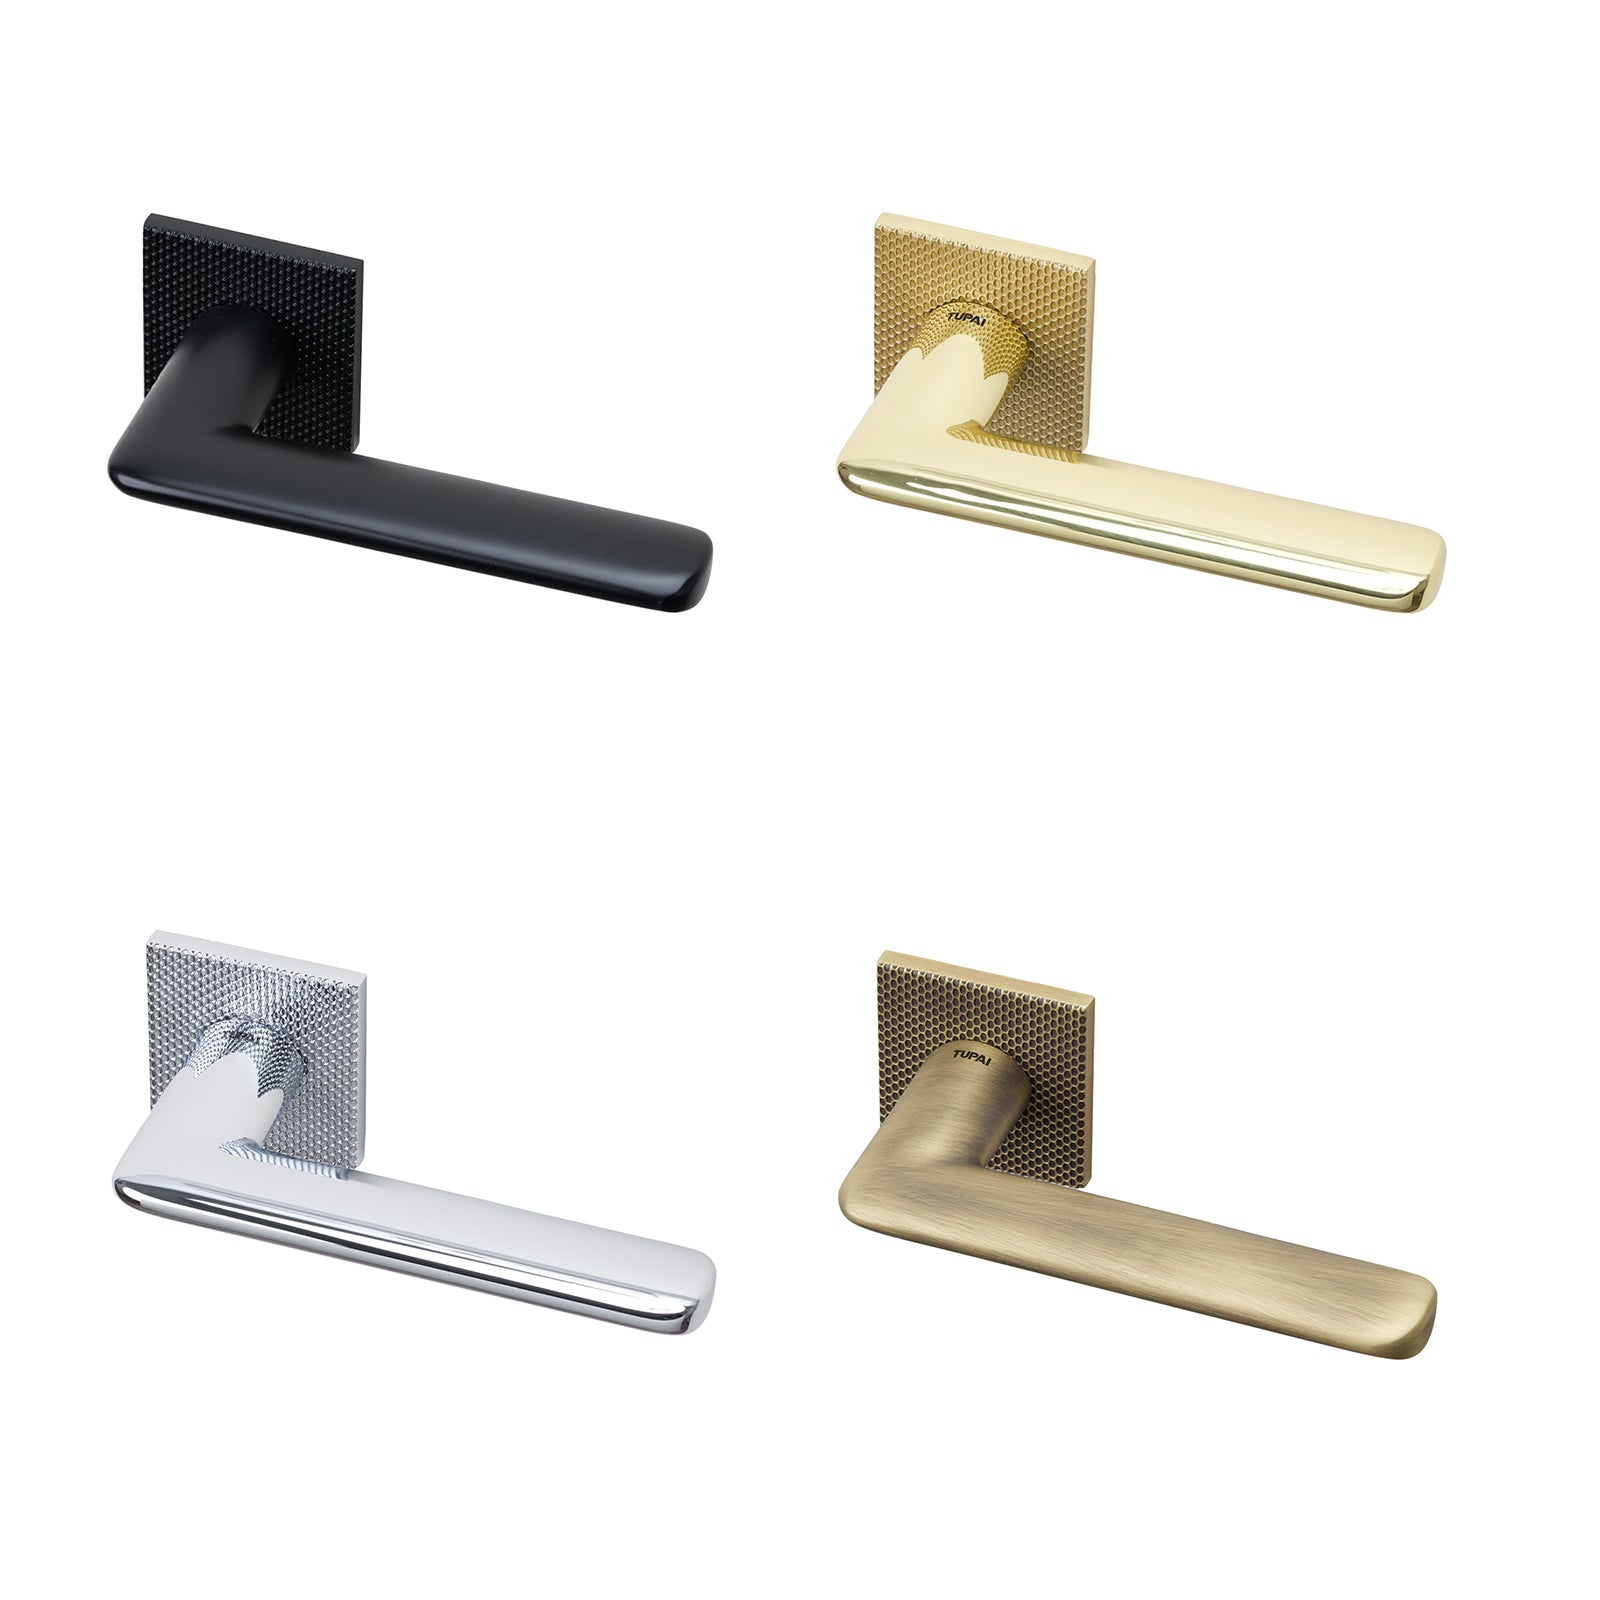 Tupai Edral lever on rose door handle with Pebbles texture design, in four finishes, Bright Chrome, Black Pearl, Matt Antique Brass, and Polished/Satin Brass.